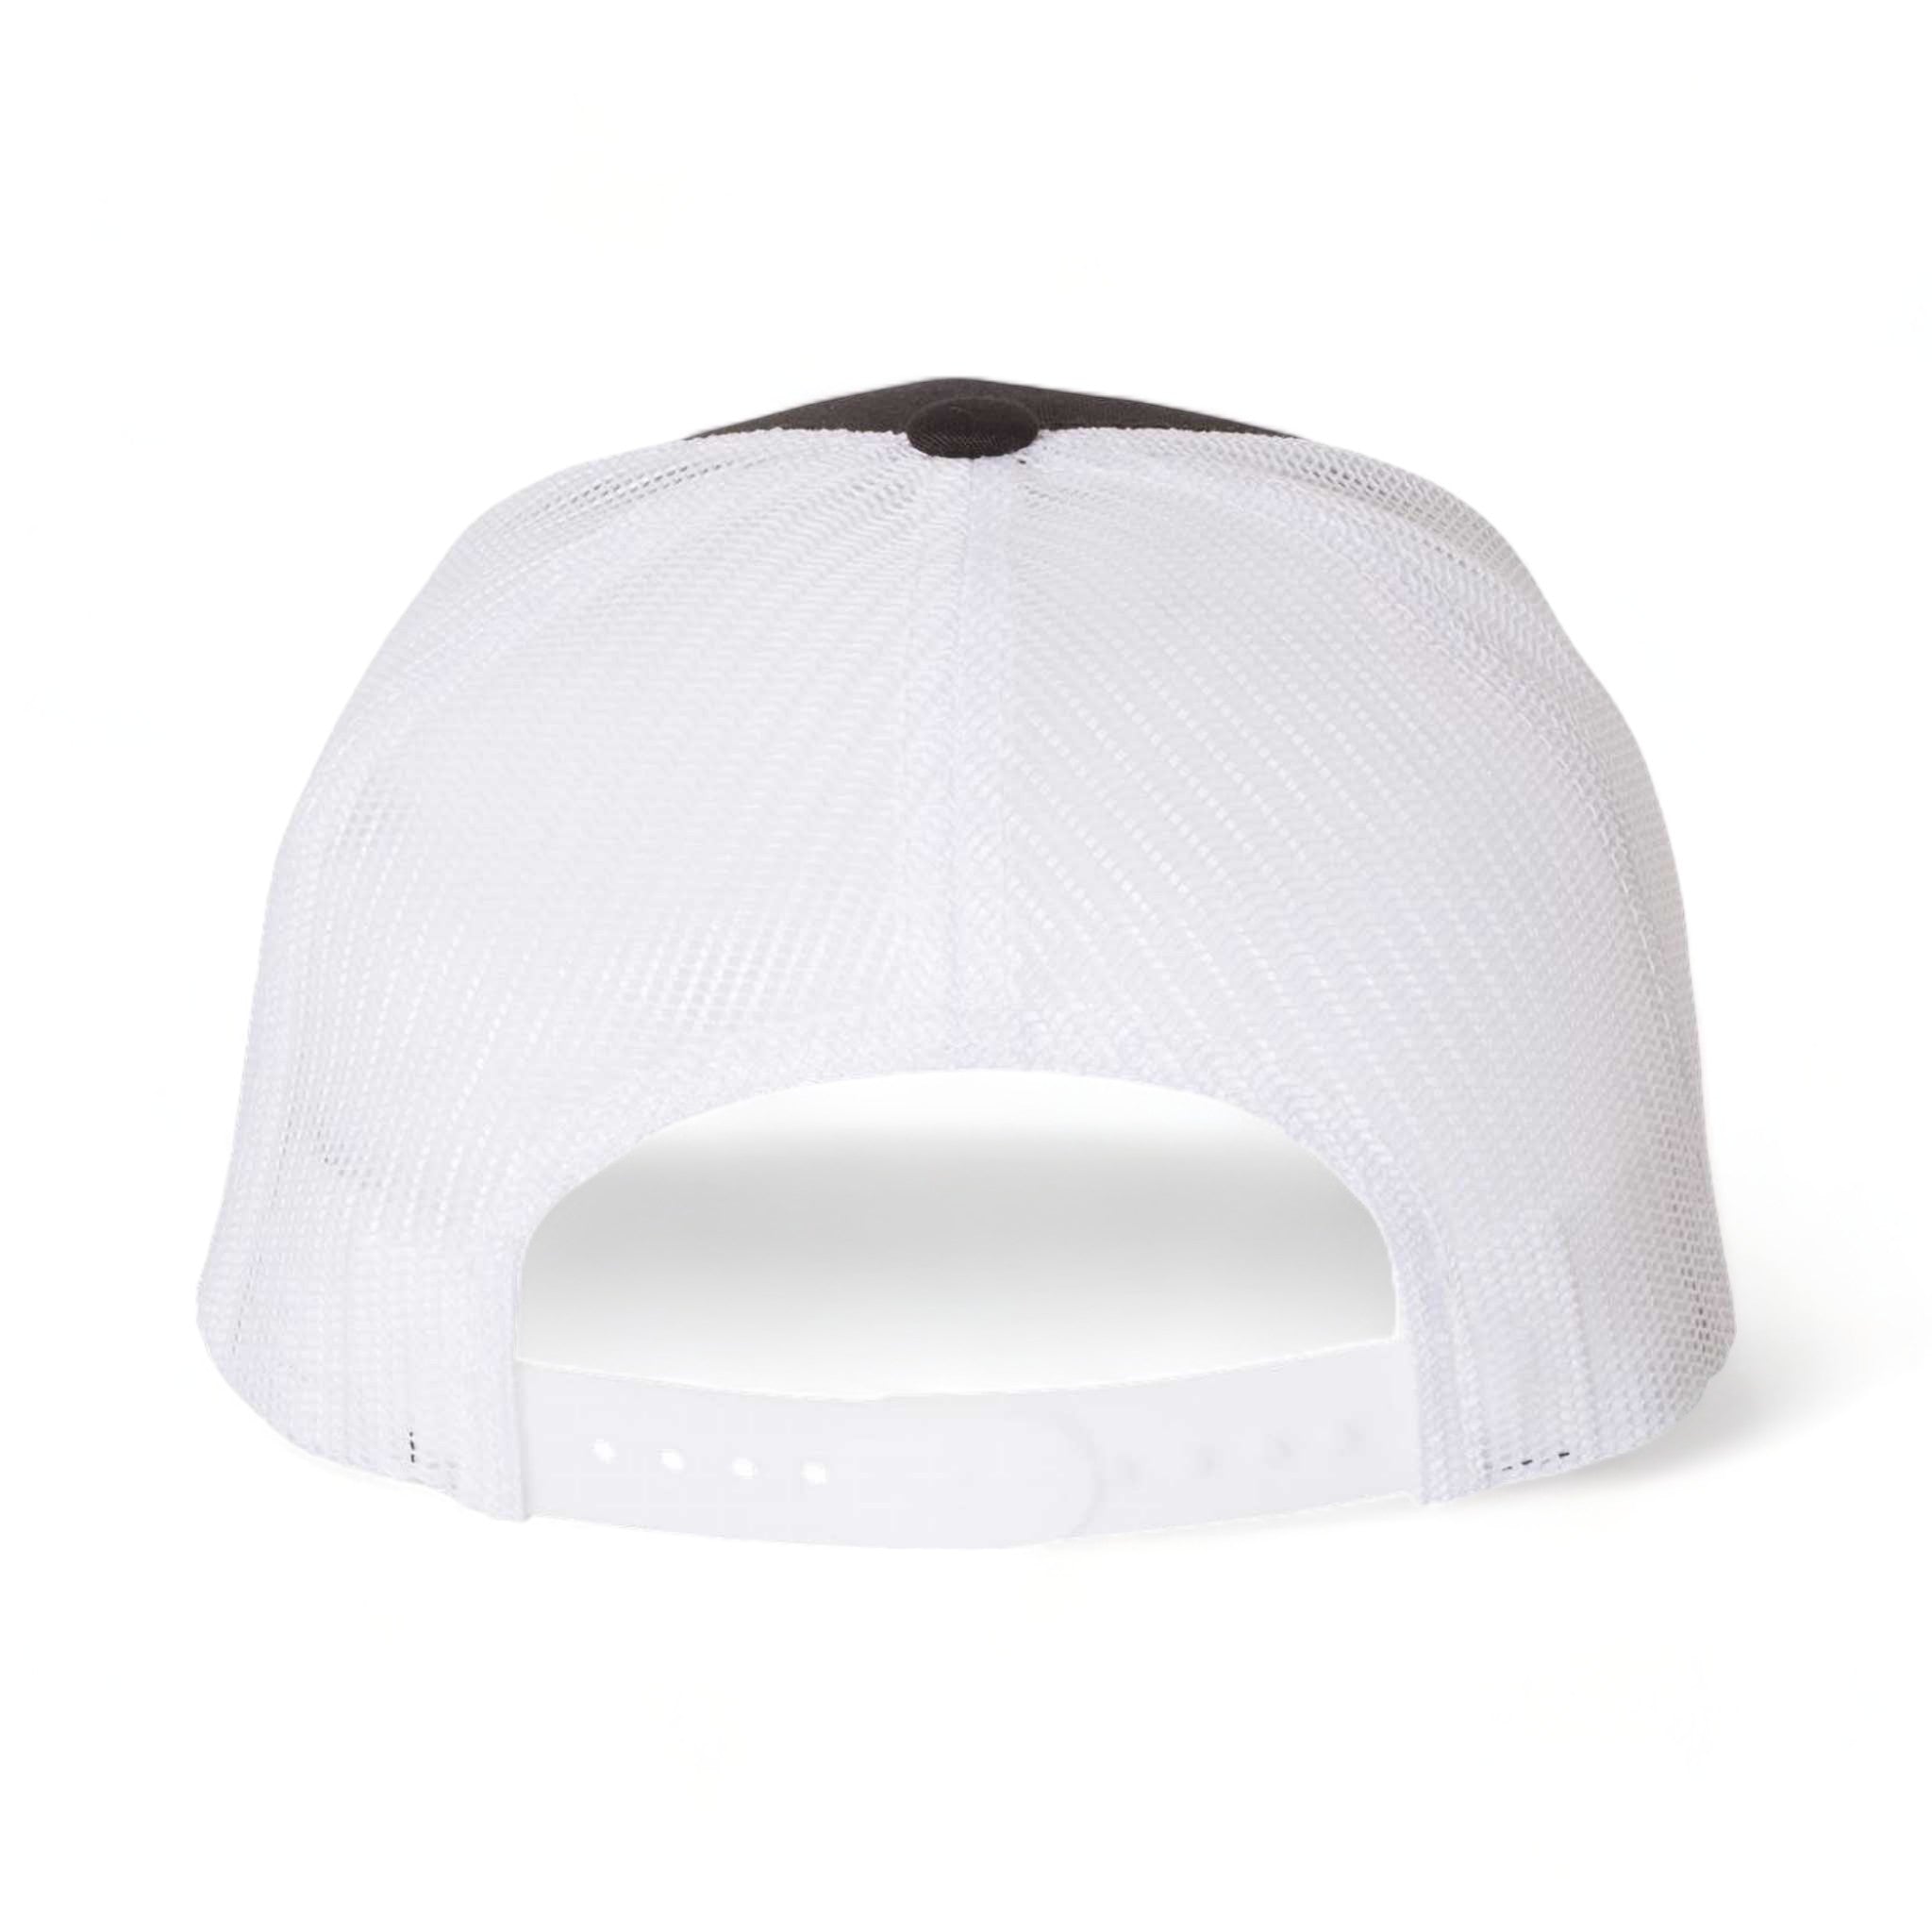 Back view of YP Classics 6506 custom hat in black and white